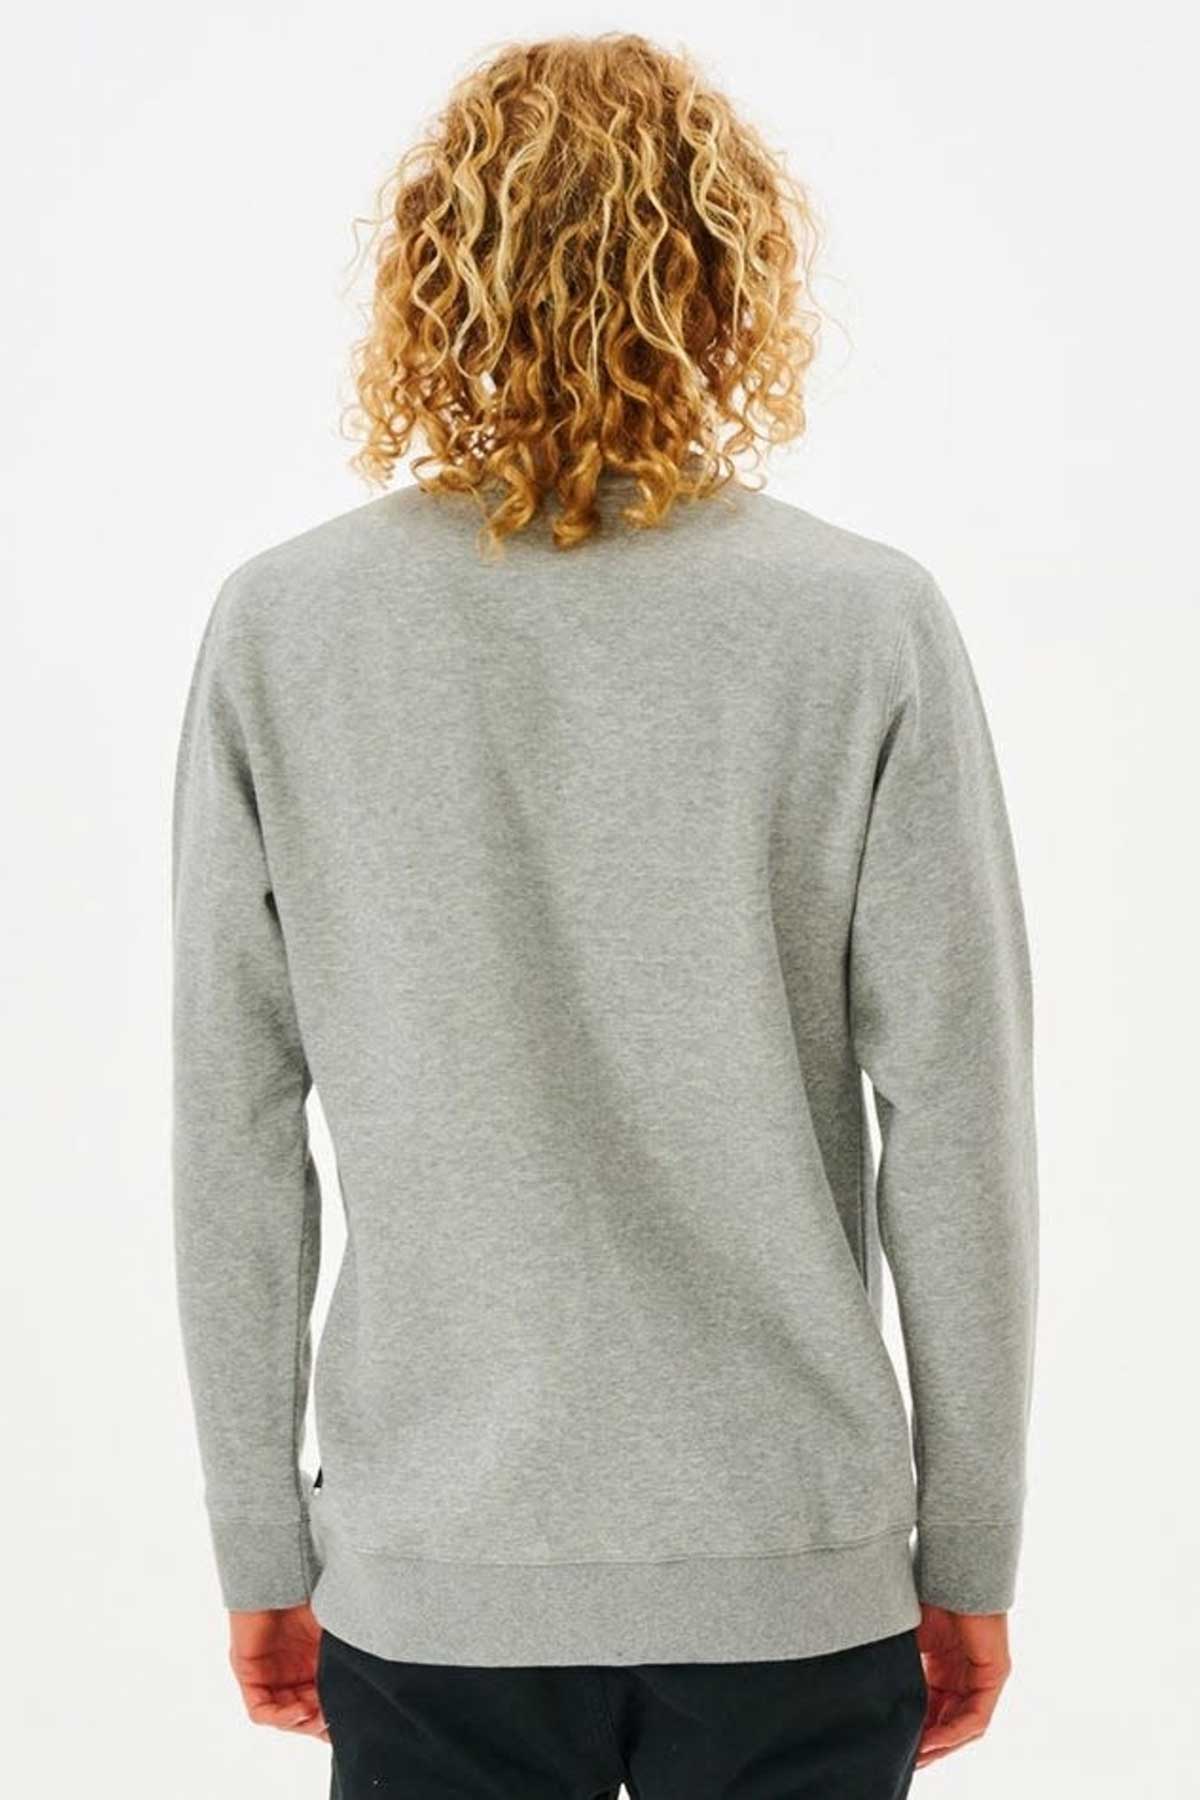 Rip Curl Mens Wetsuit Icon Sweatshirt back view of grey maple